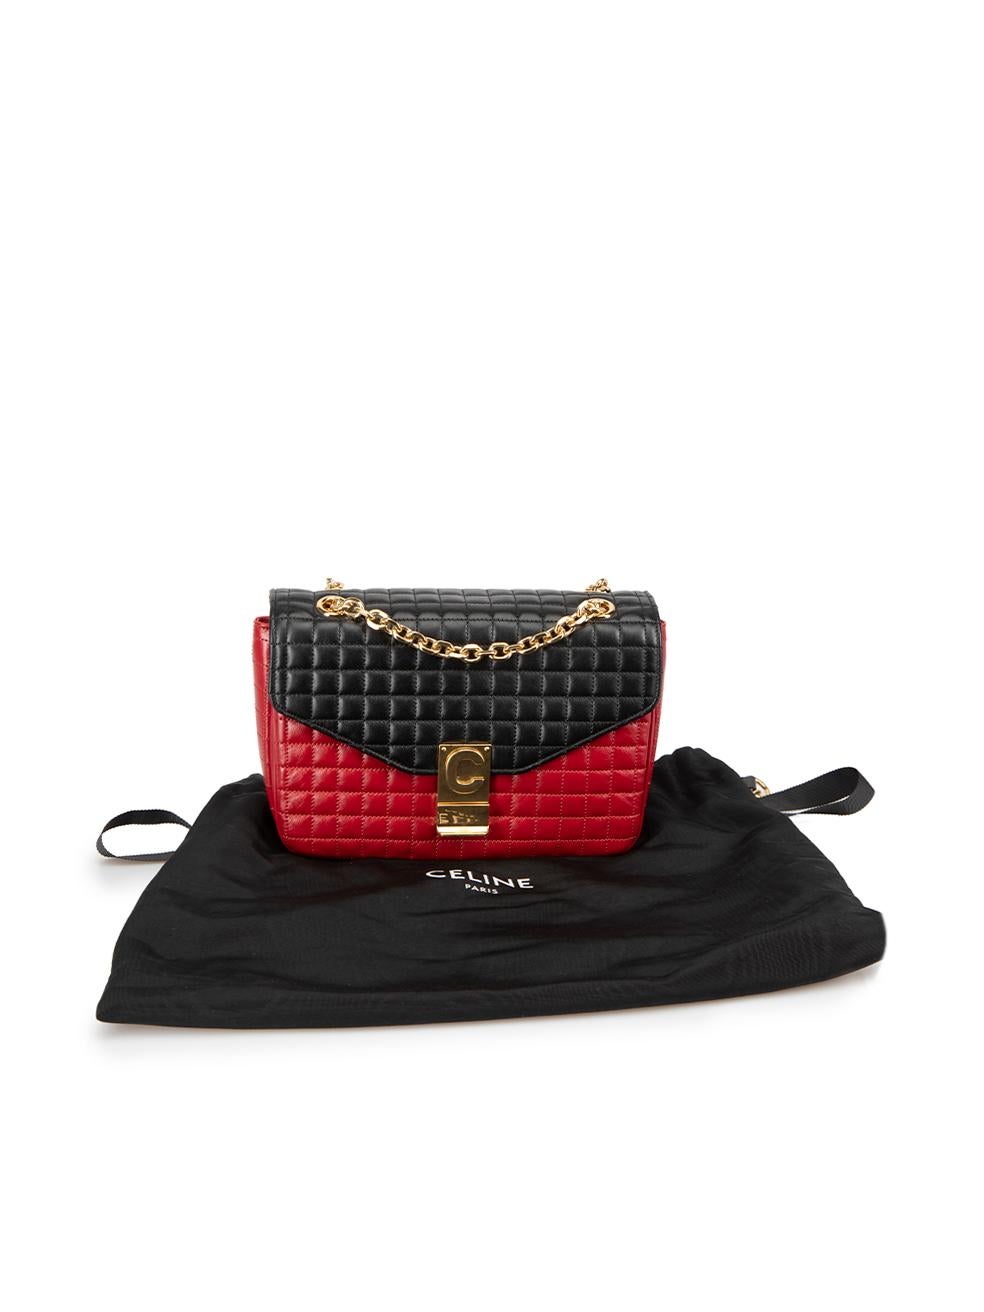 Céline Women's Red & Black Leather Quilted Chain Strap C Bag 4